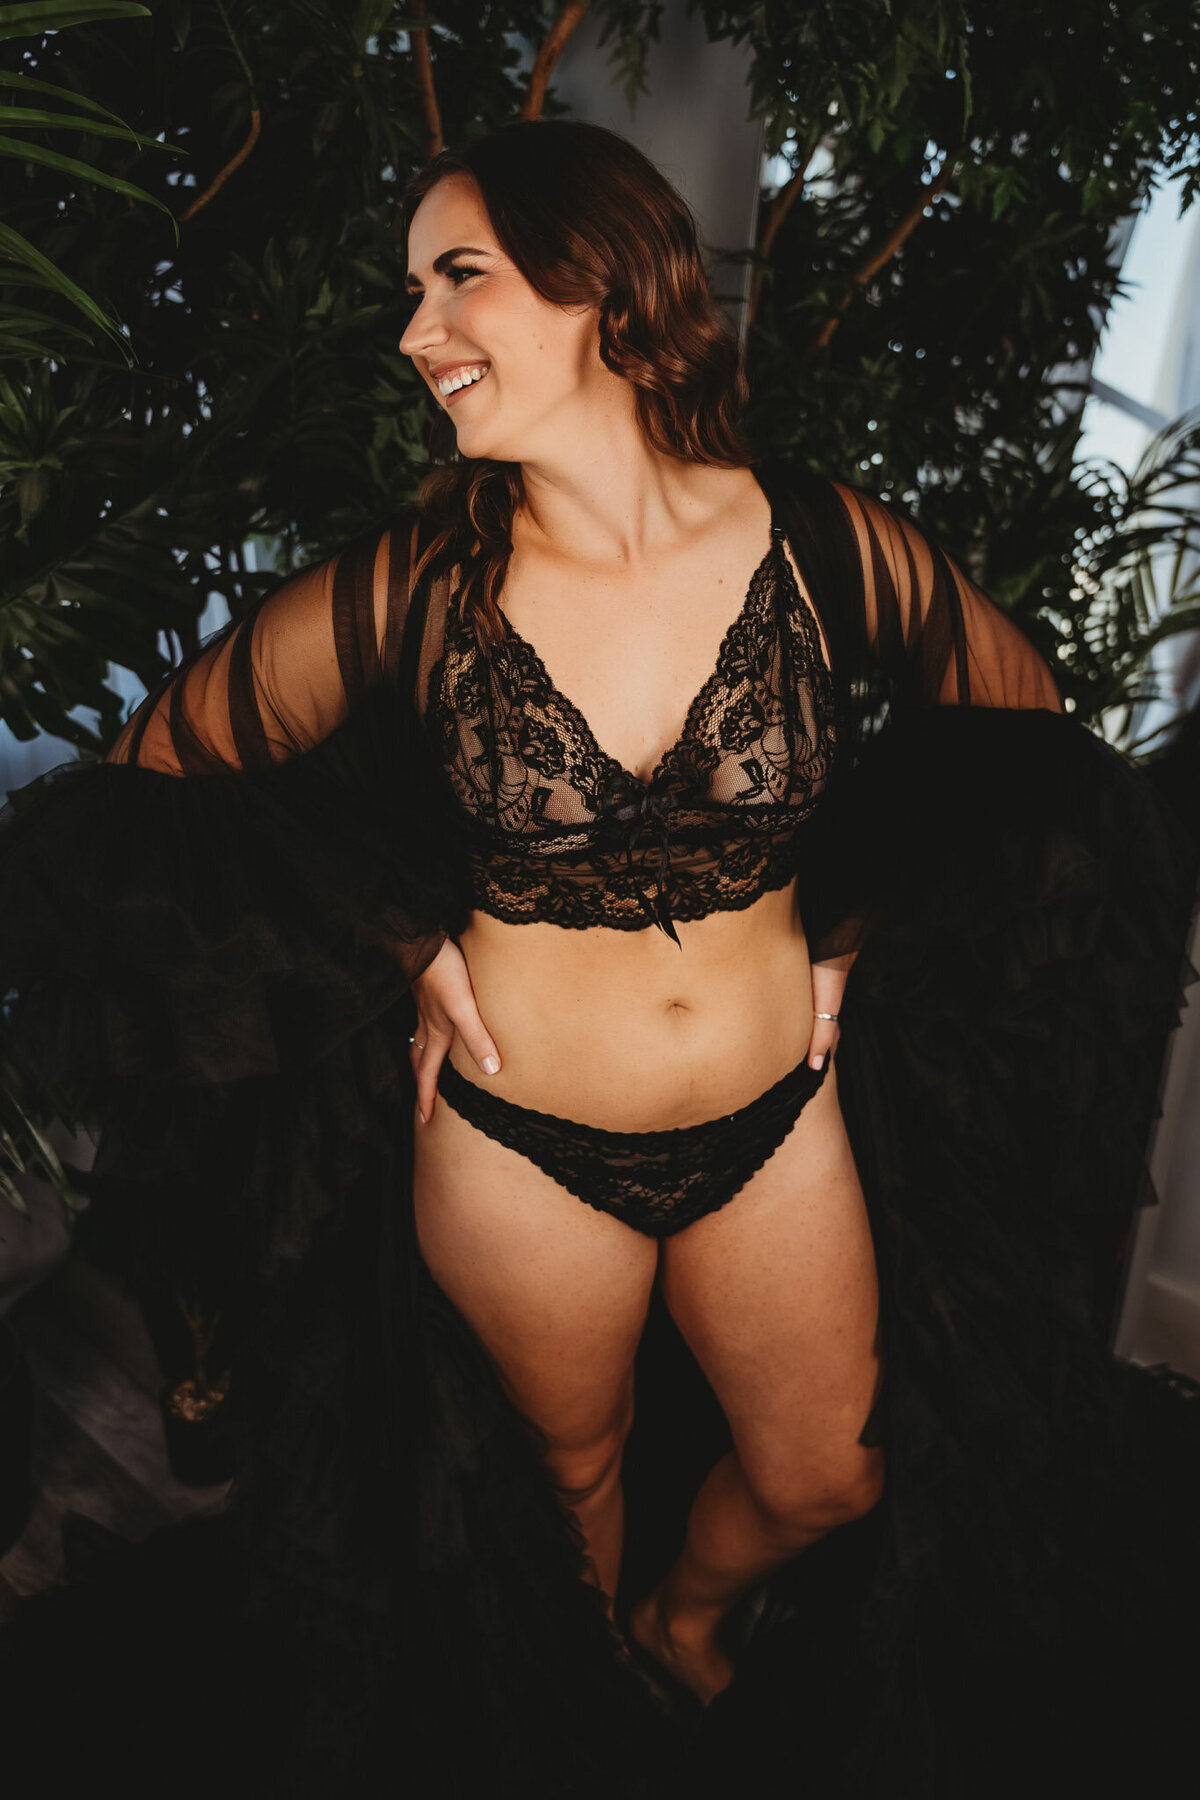 smiling woman wearing black two piece lace lingerie and a giant black tulle robe, while laughing away from the camera